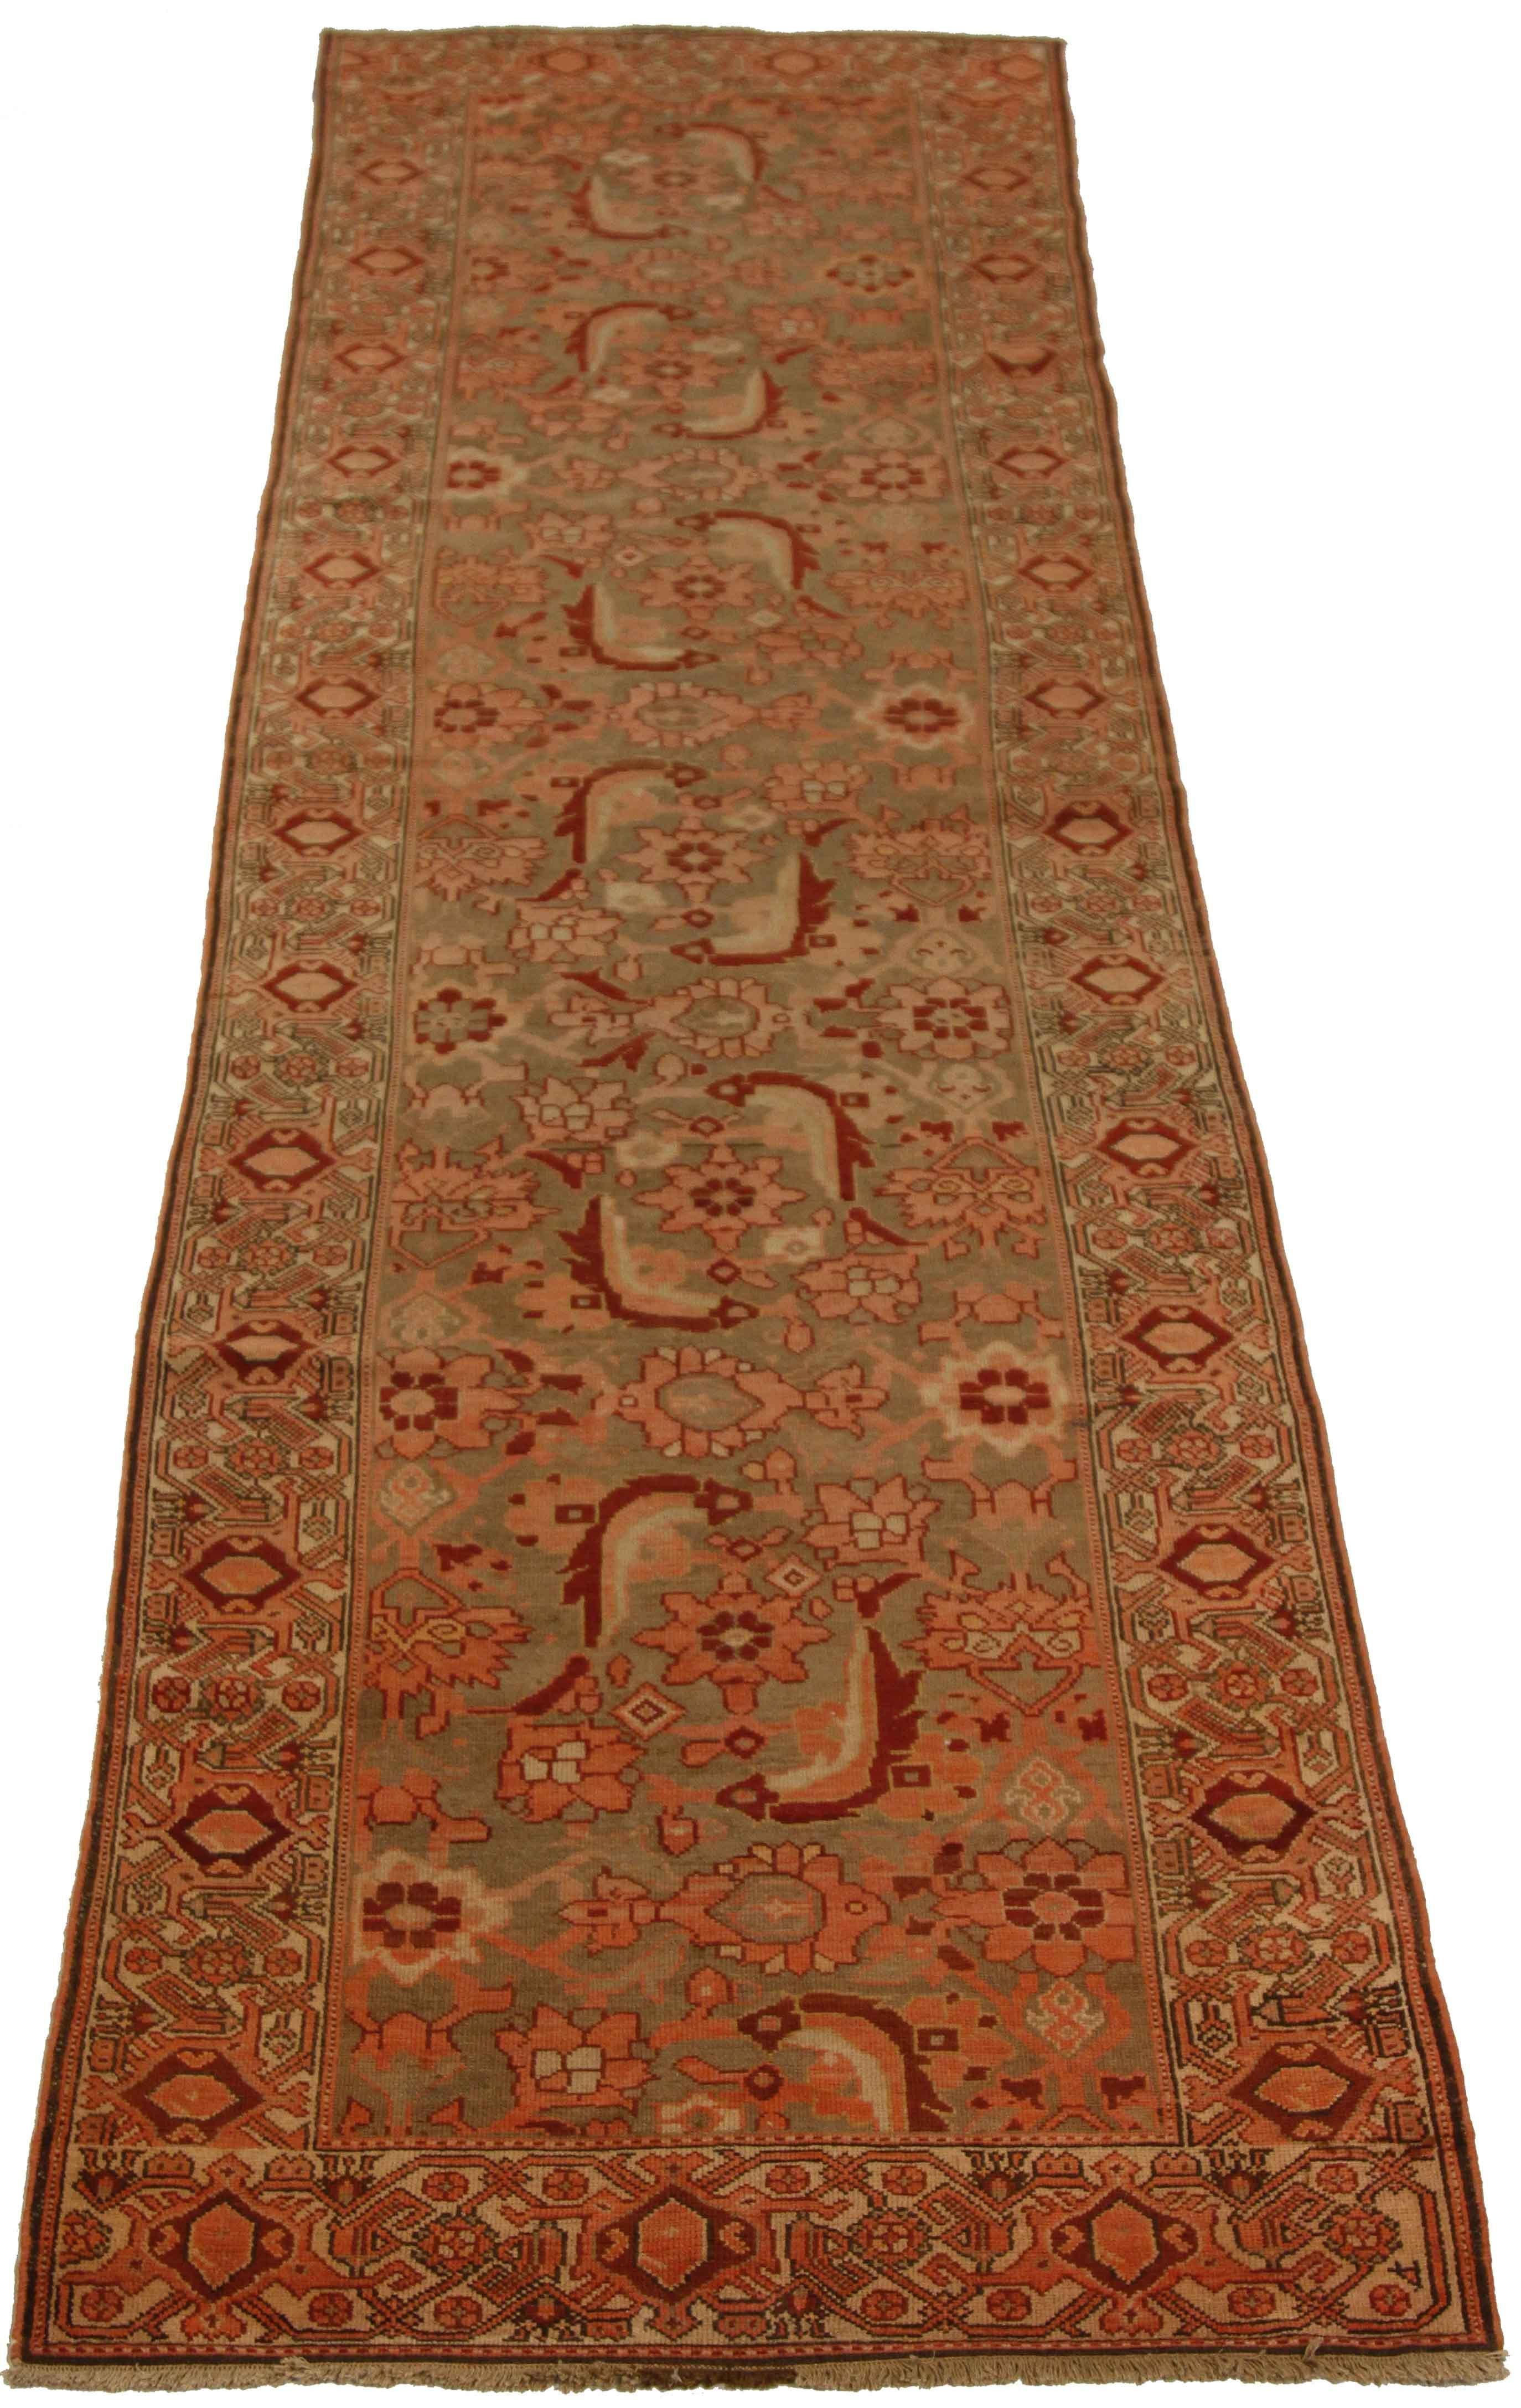 Hand-Knotted Antique Persian Rug Malayer Style with Fiery Floral Patterns, circa 1920s For Sale